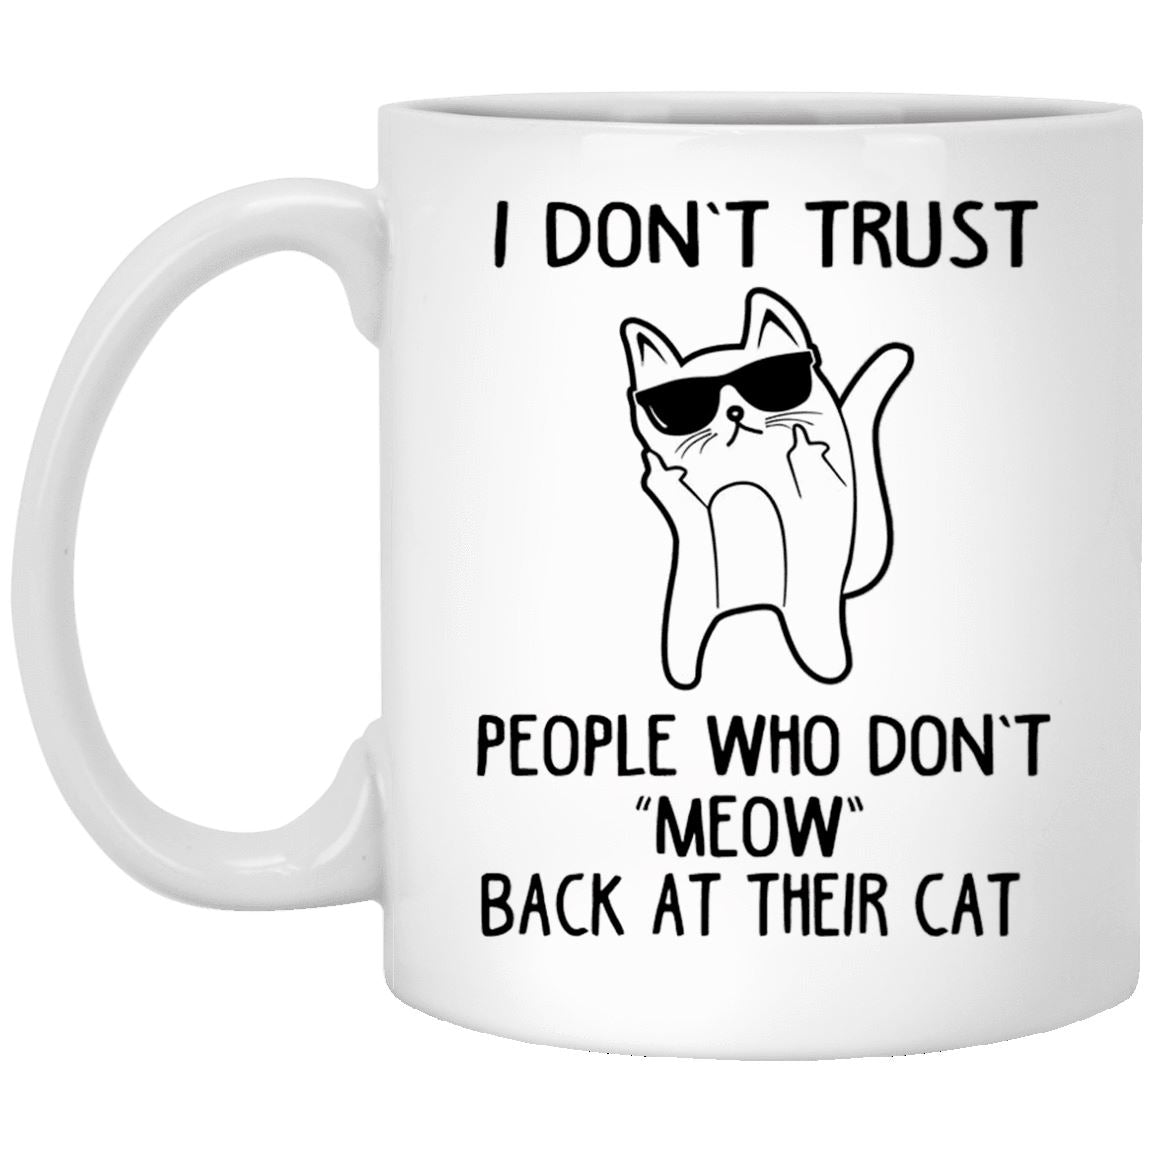 Cat Mug - I Don't Trust People Who Don't Meow Back - CatsForLife